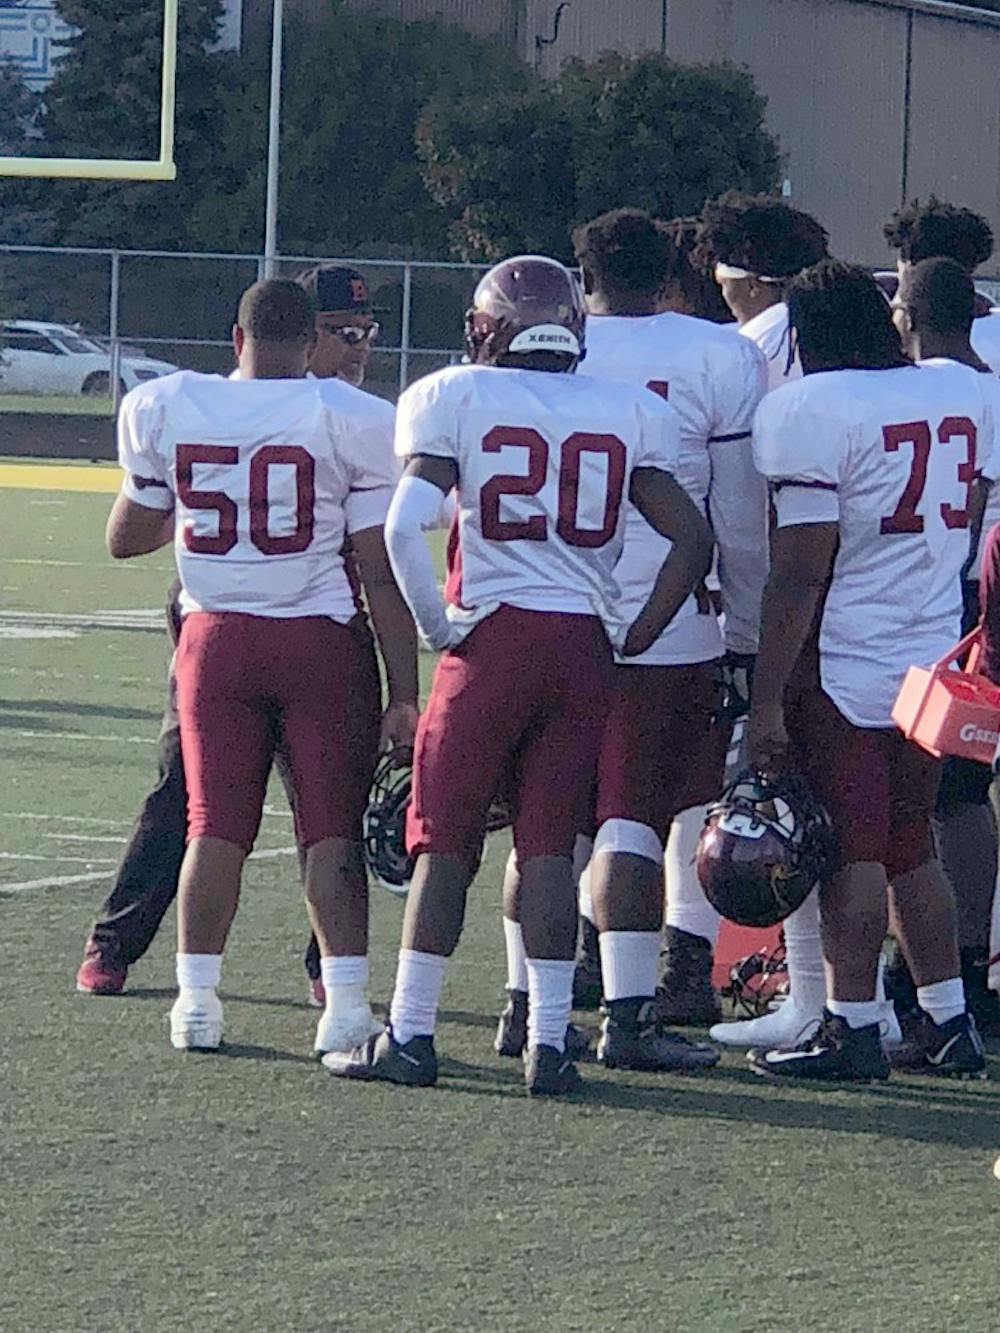 <p>The Renaissance varsity football team devised a fun, but competitive strategy to keep teammates another focused throughout game.&nbsp;Dakarai Washington said: “We were betting each other push-ups on who makes it to the quarterback first. I just wanted to have fun with my brothers if this was my last game.”</p>